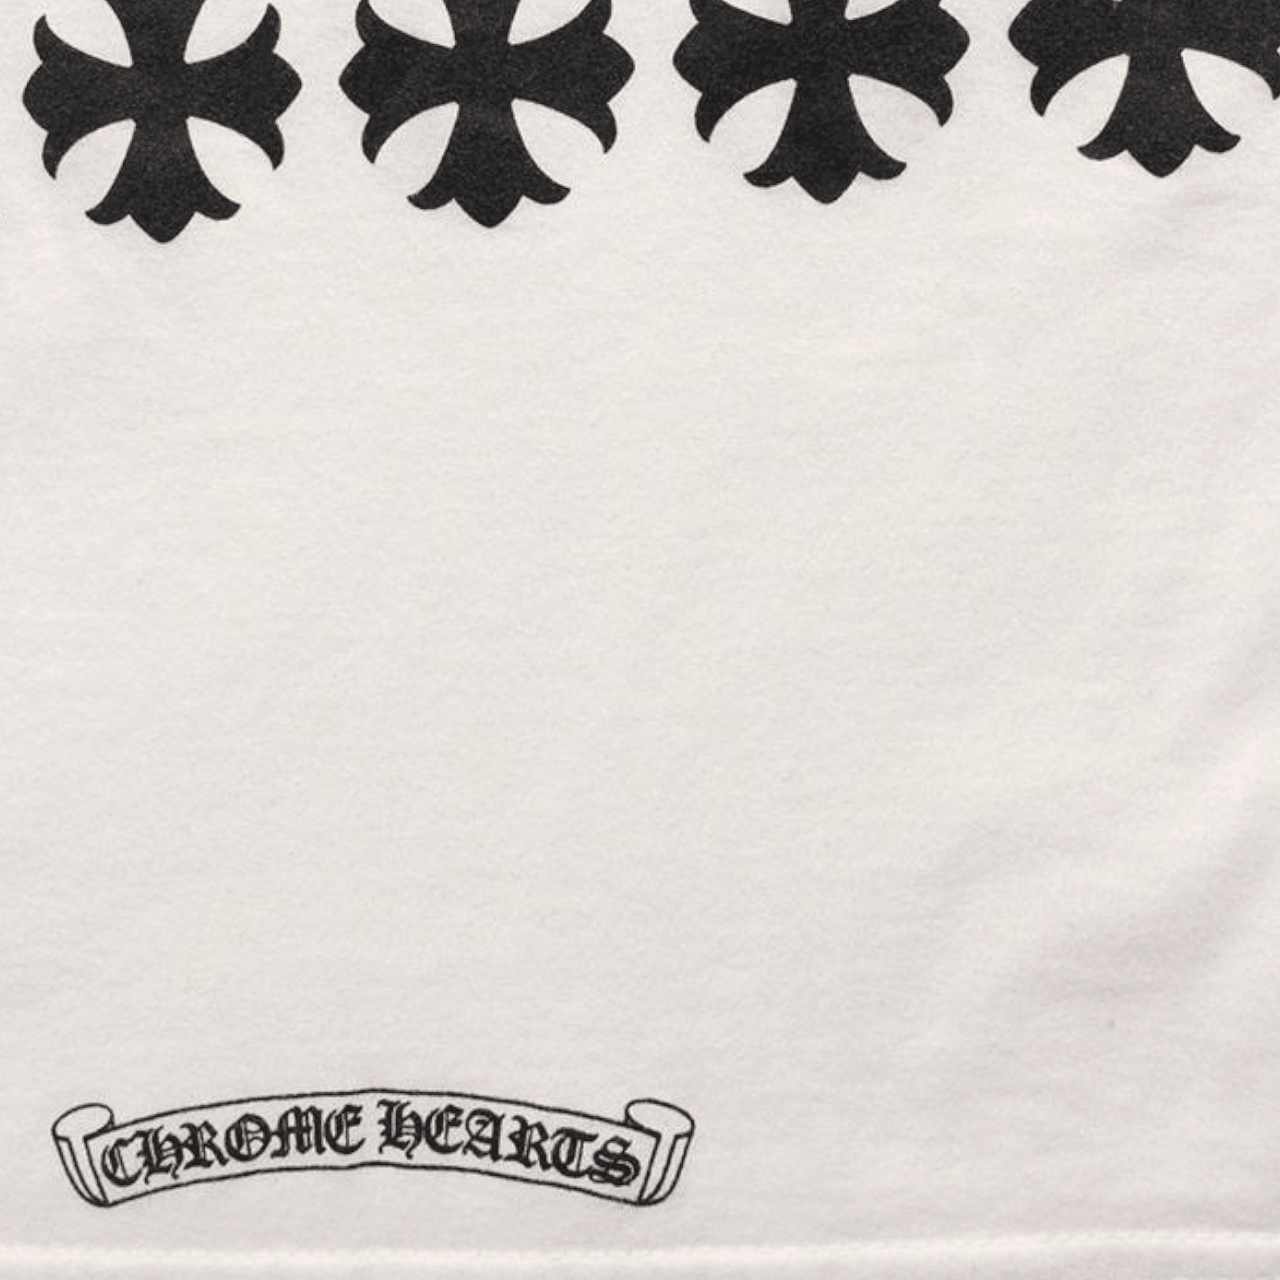 CHROME HEARTS Pocket tee Horseshoe Cross Neon Red & Back White T-shirt - Known Source